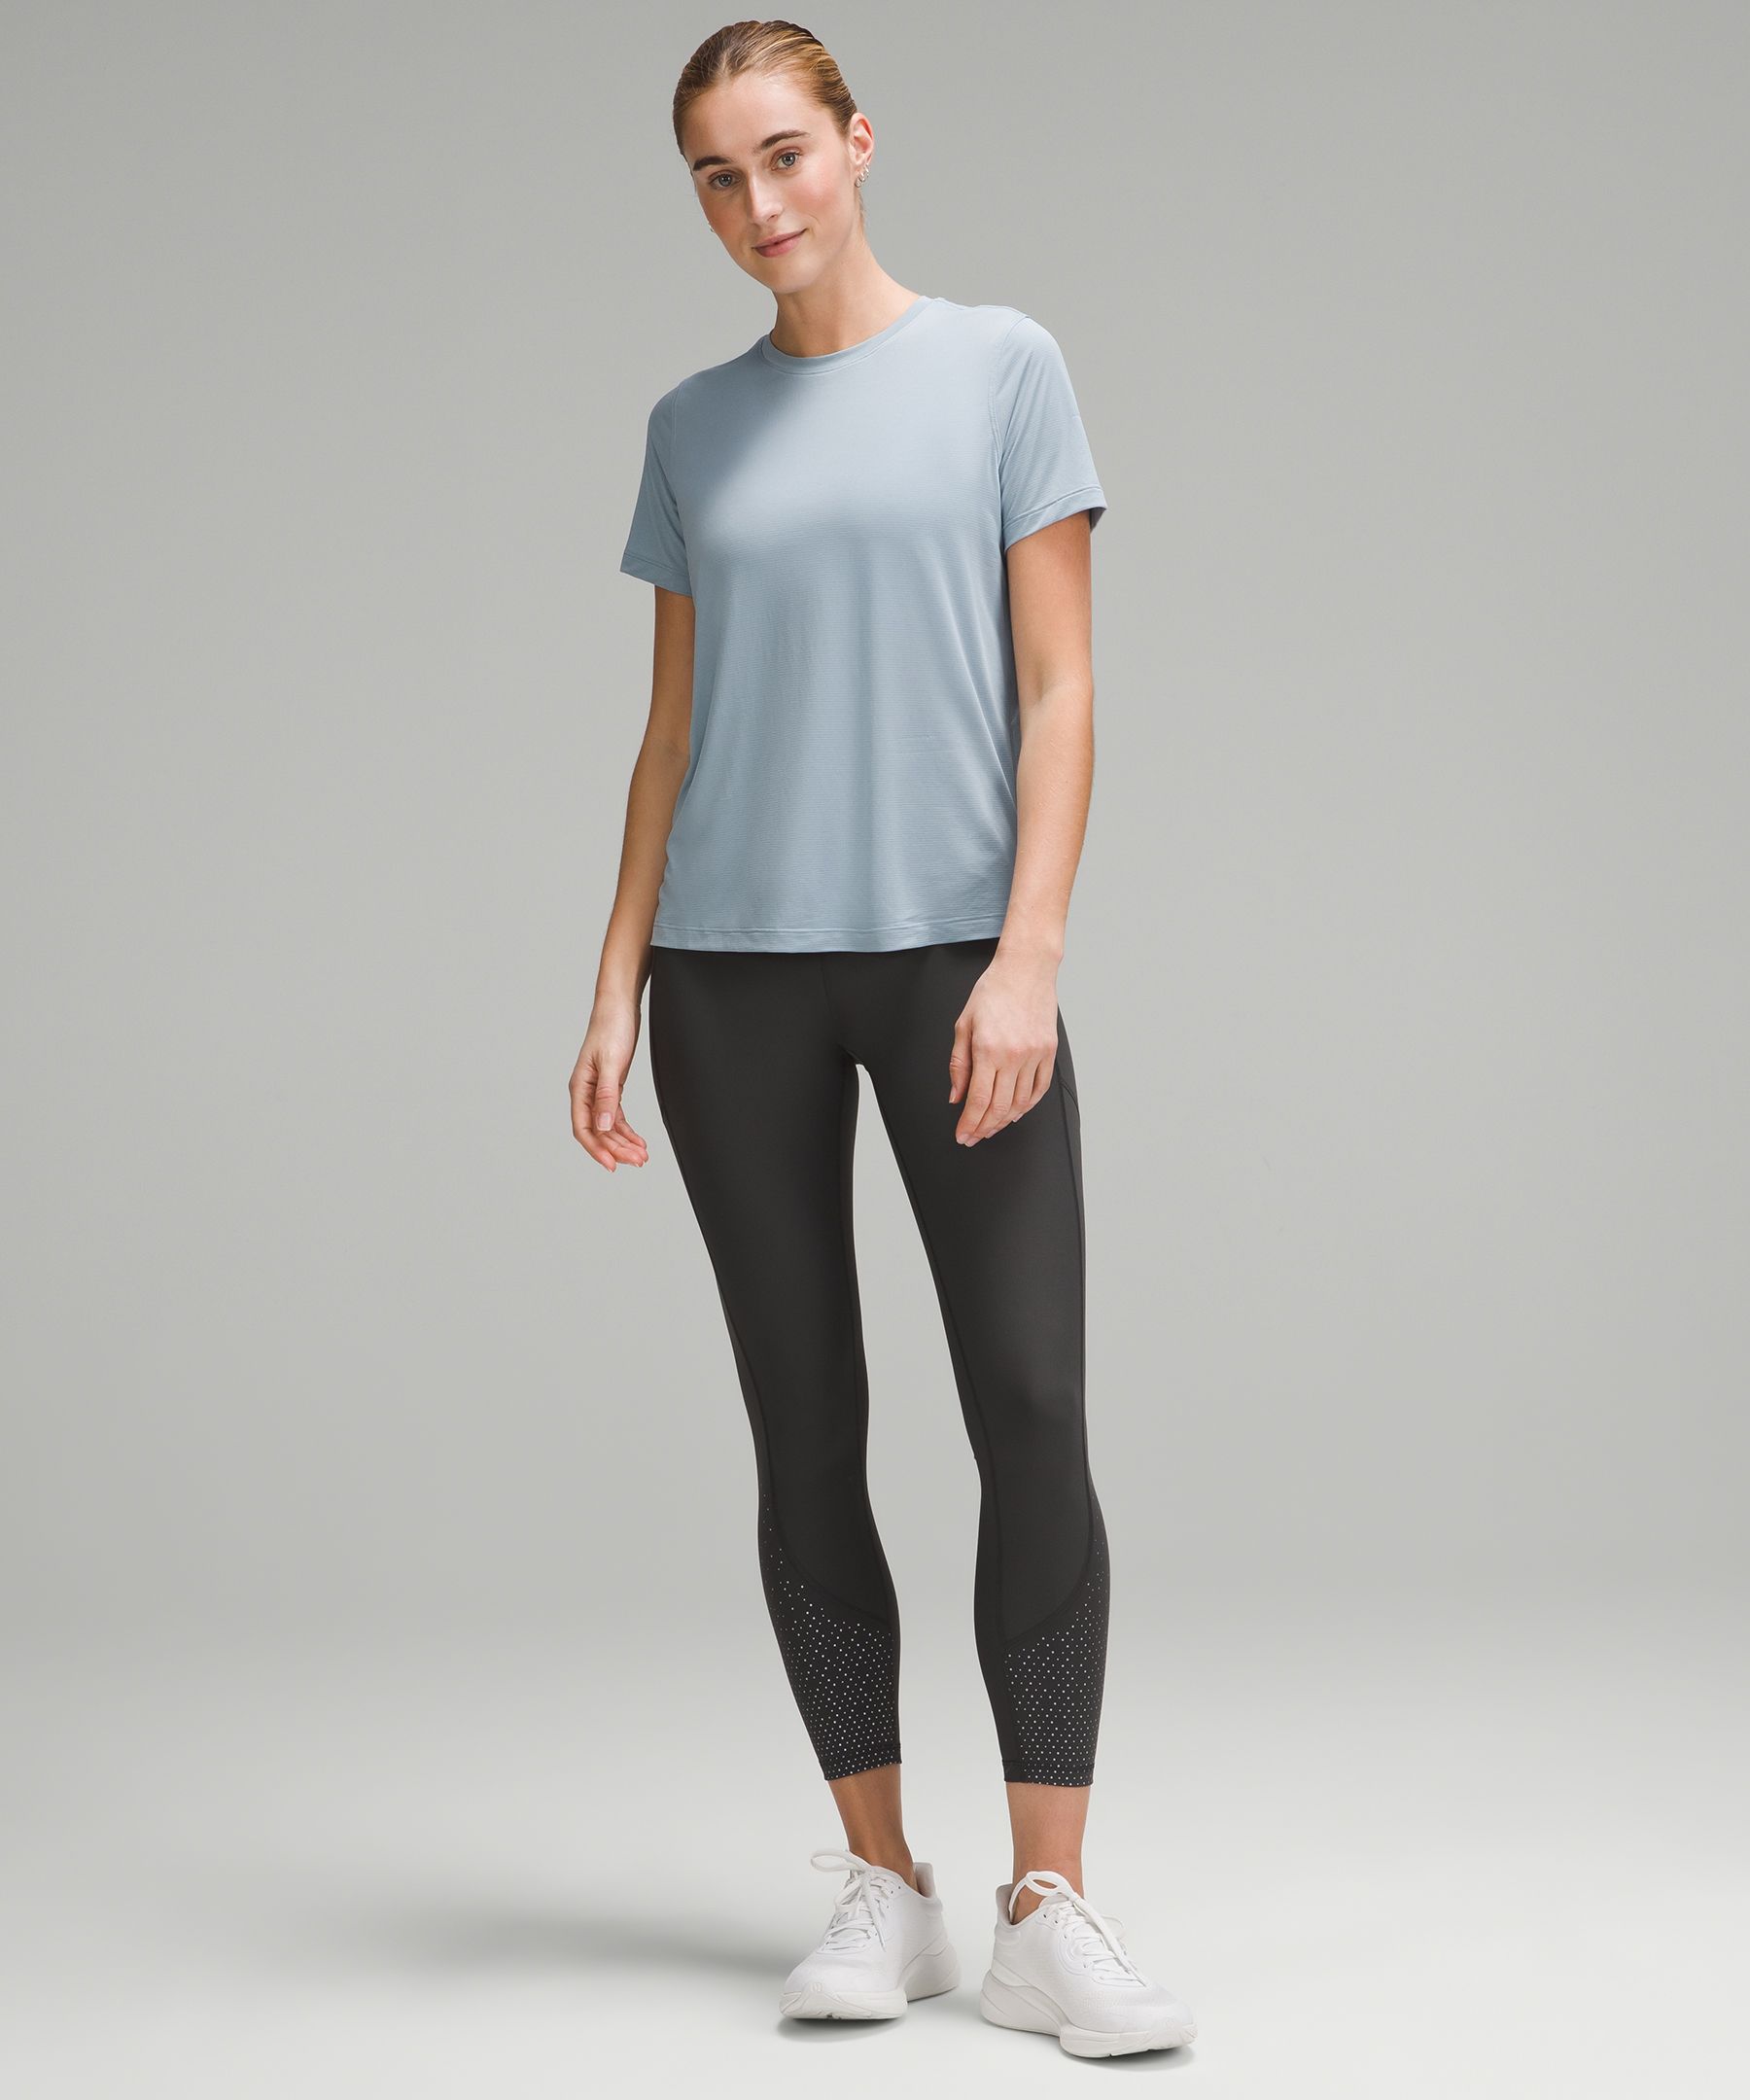 Bring back the tight stuff tights!!! In all the colors : r/lululemon